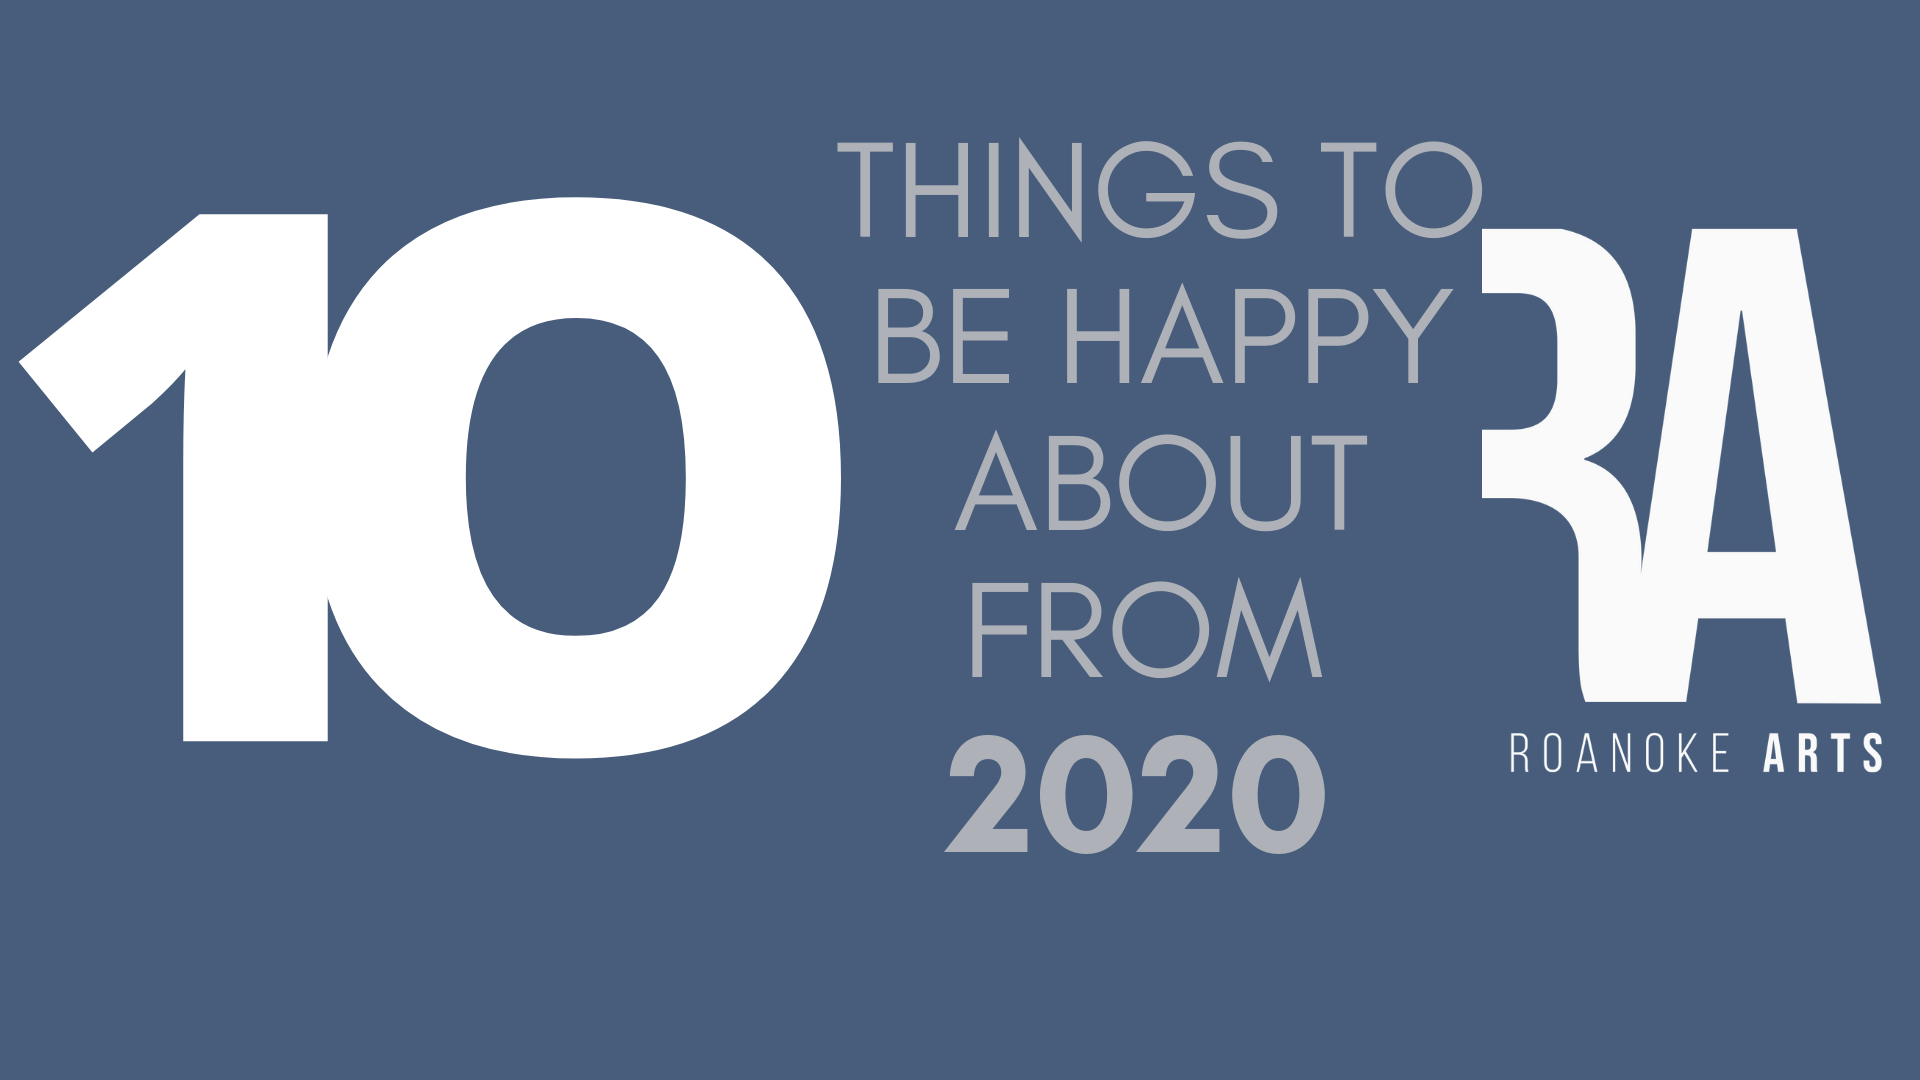 » 10 things to be happy about from 2020